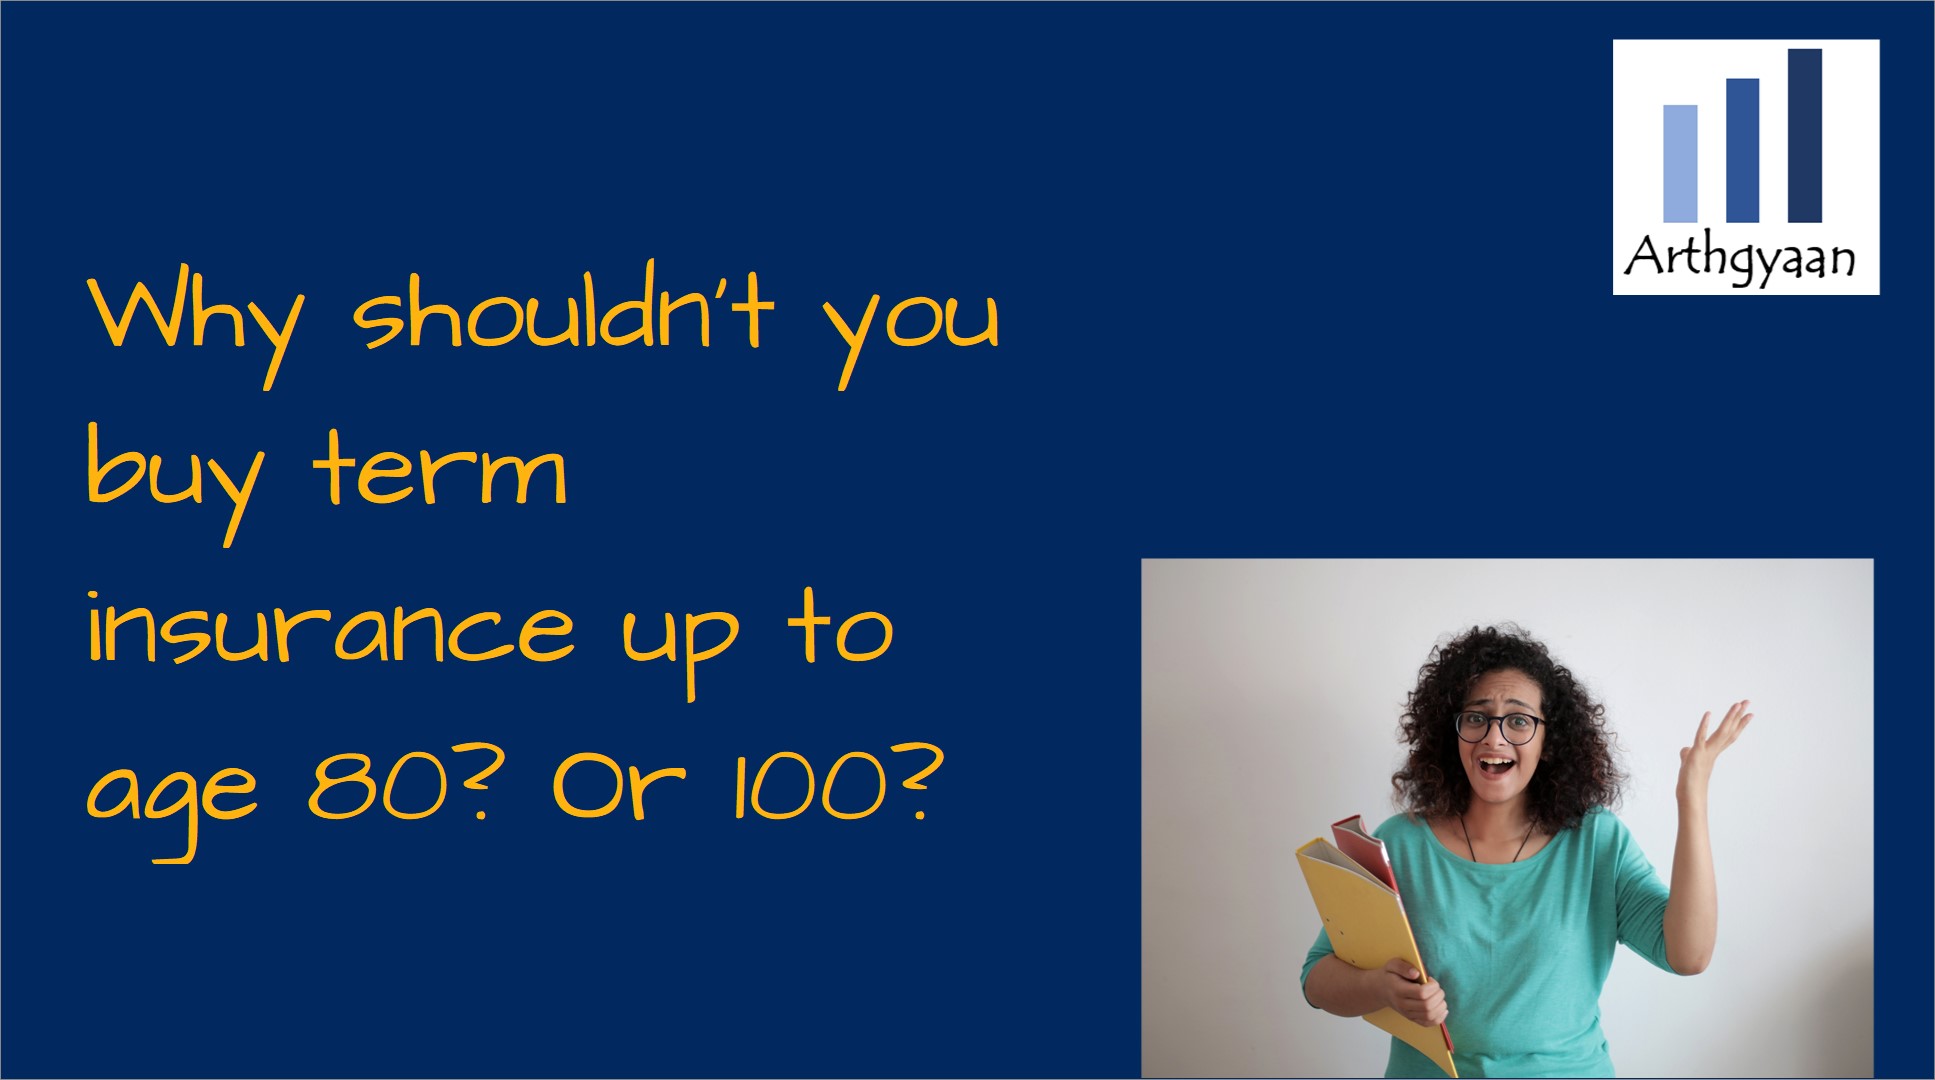 Why shouldn't you buy term insurance up to age 80? Or 100?